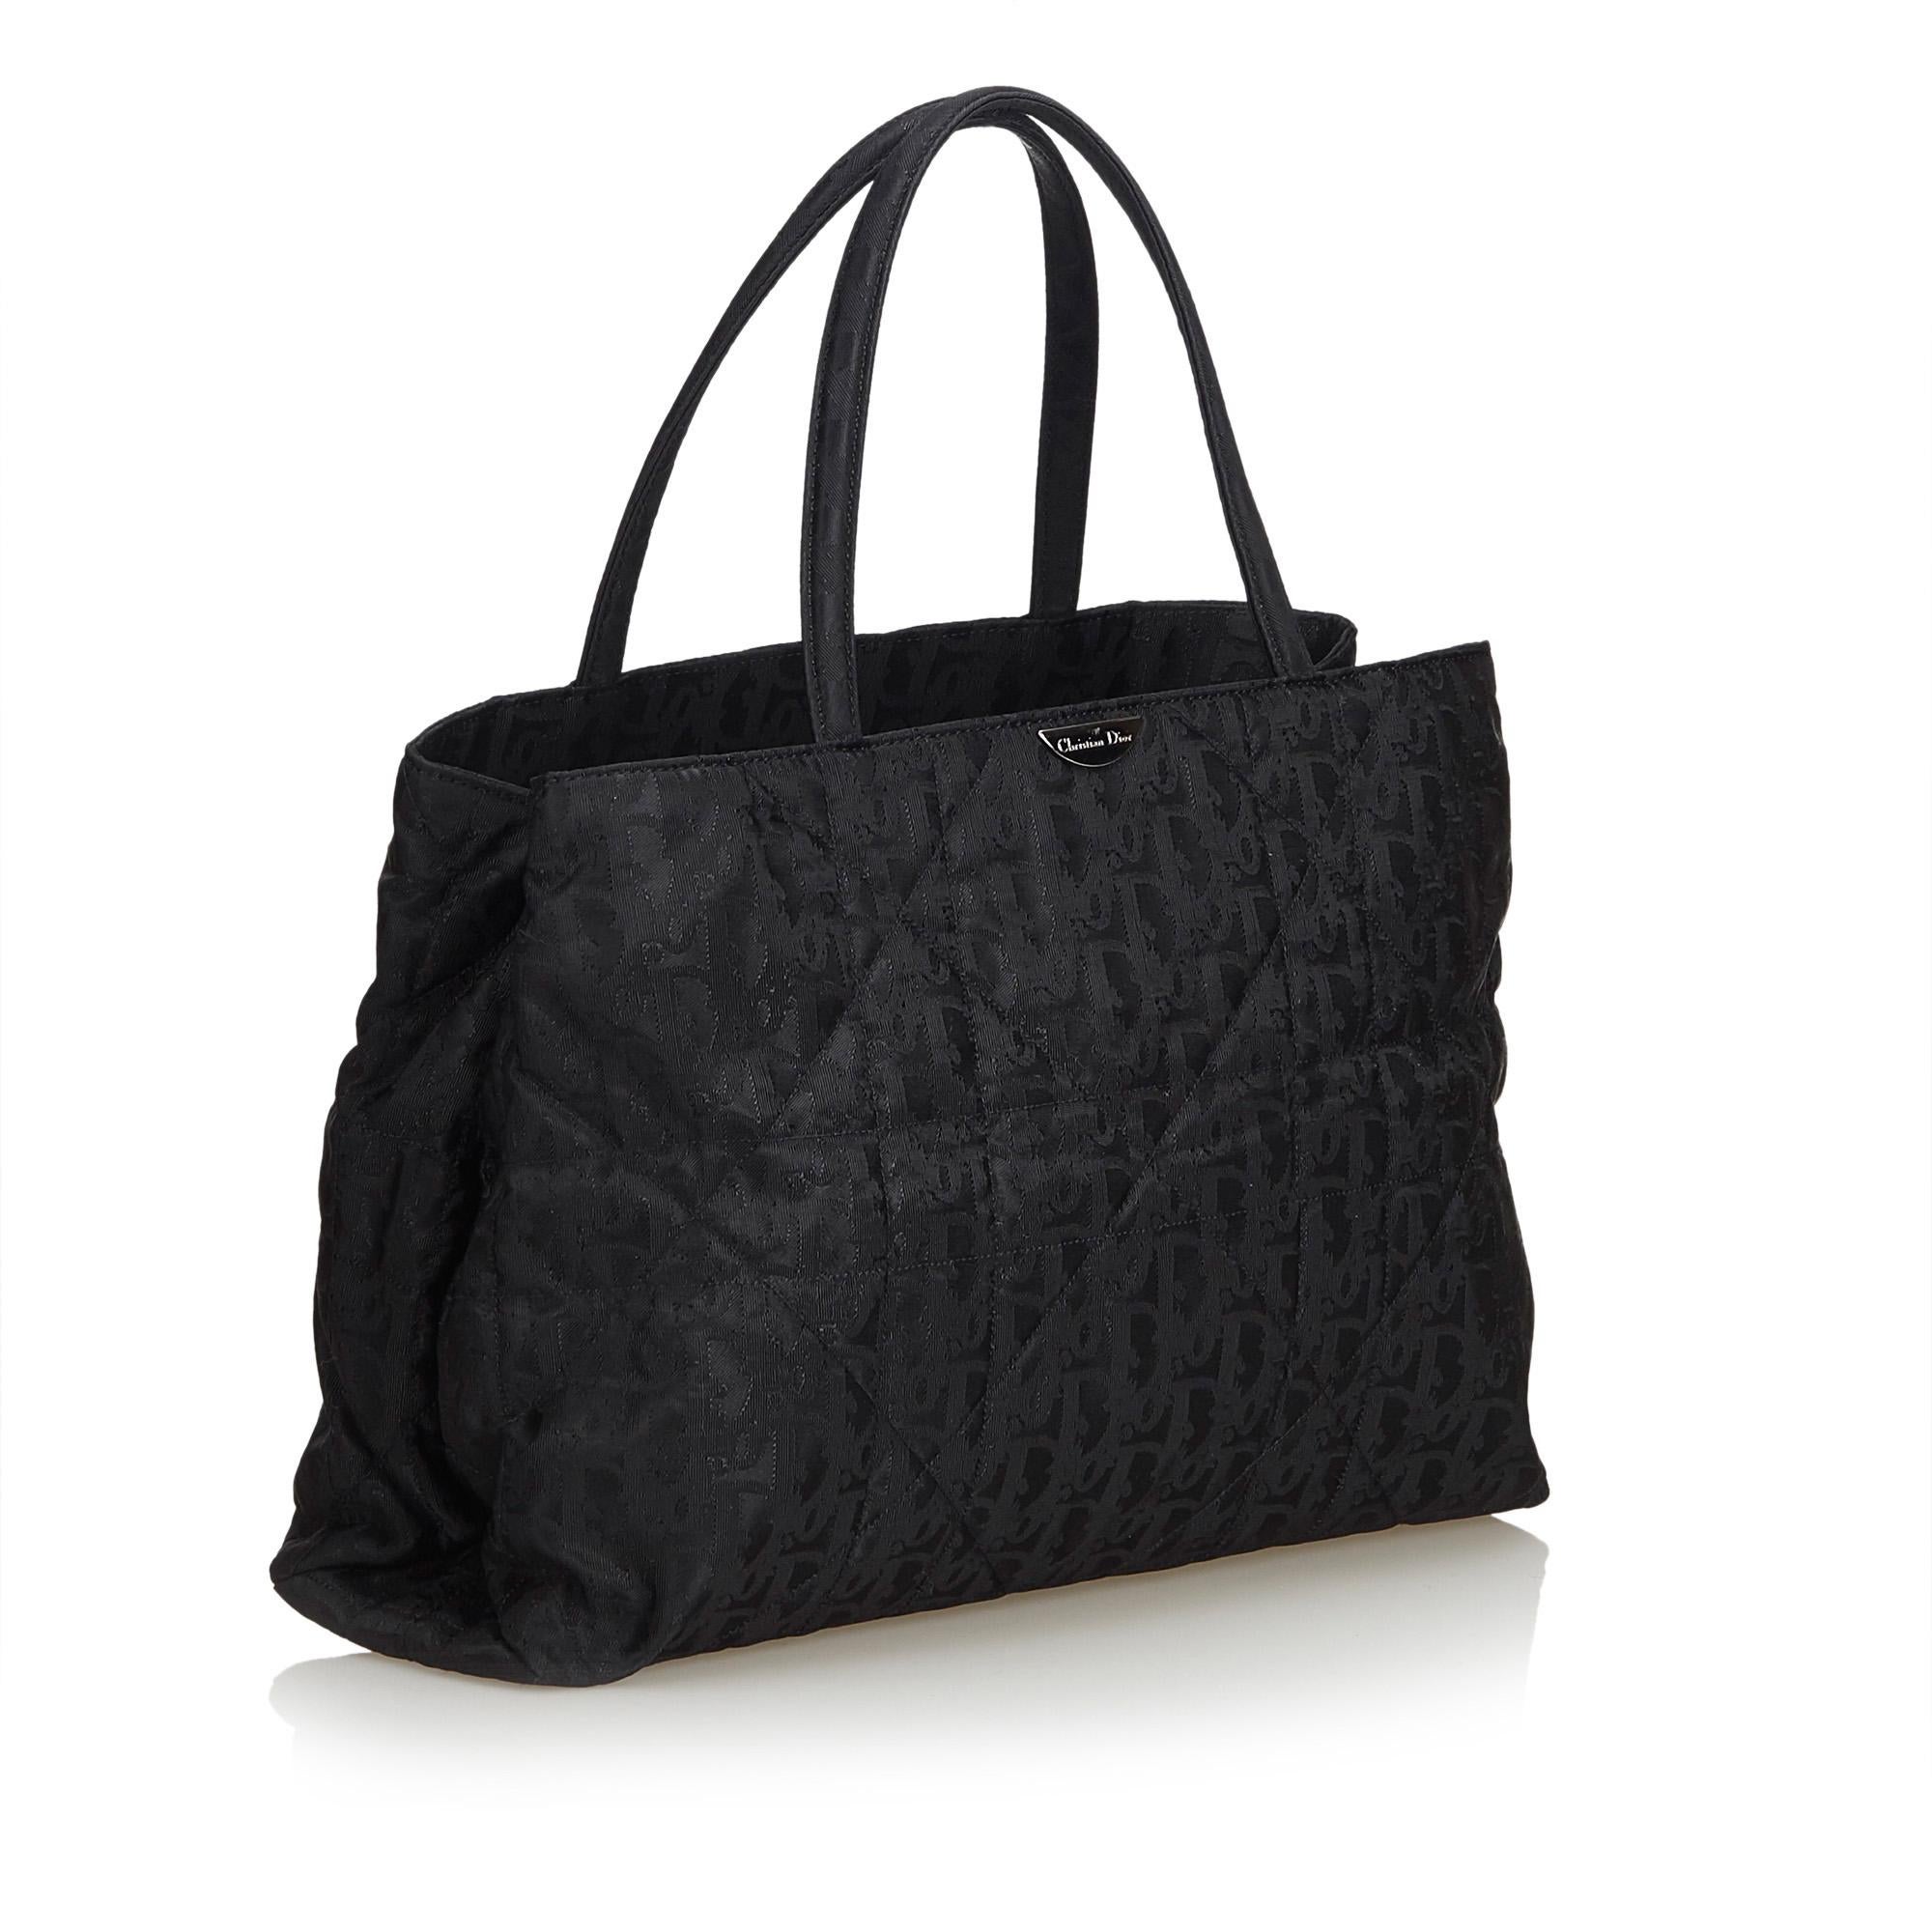 This tote bag features a nylon body, flat straps, open top, and interior zip and open pocket. It carries as AB condition rating.

Inclusions: 
Dust Bag

Dimensions:
Length: 22.00 cm
Width: 33.00 cm
Depth: 10.00 cm
Hand Drop: 15.00 cm
Shoulder Drop: